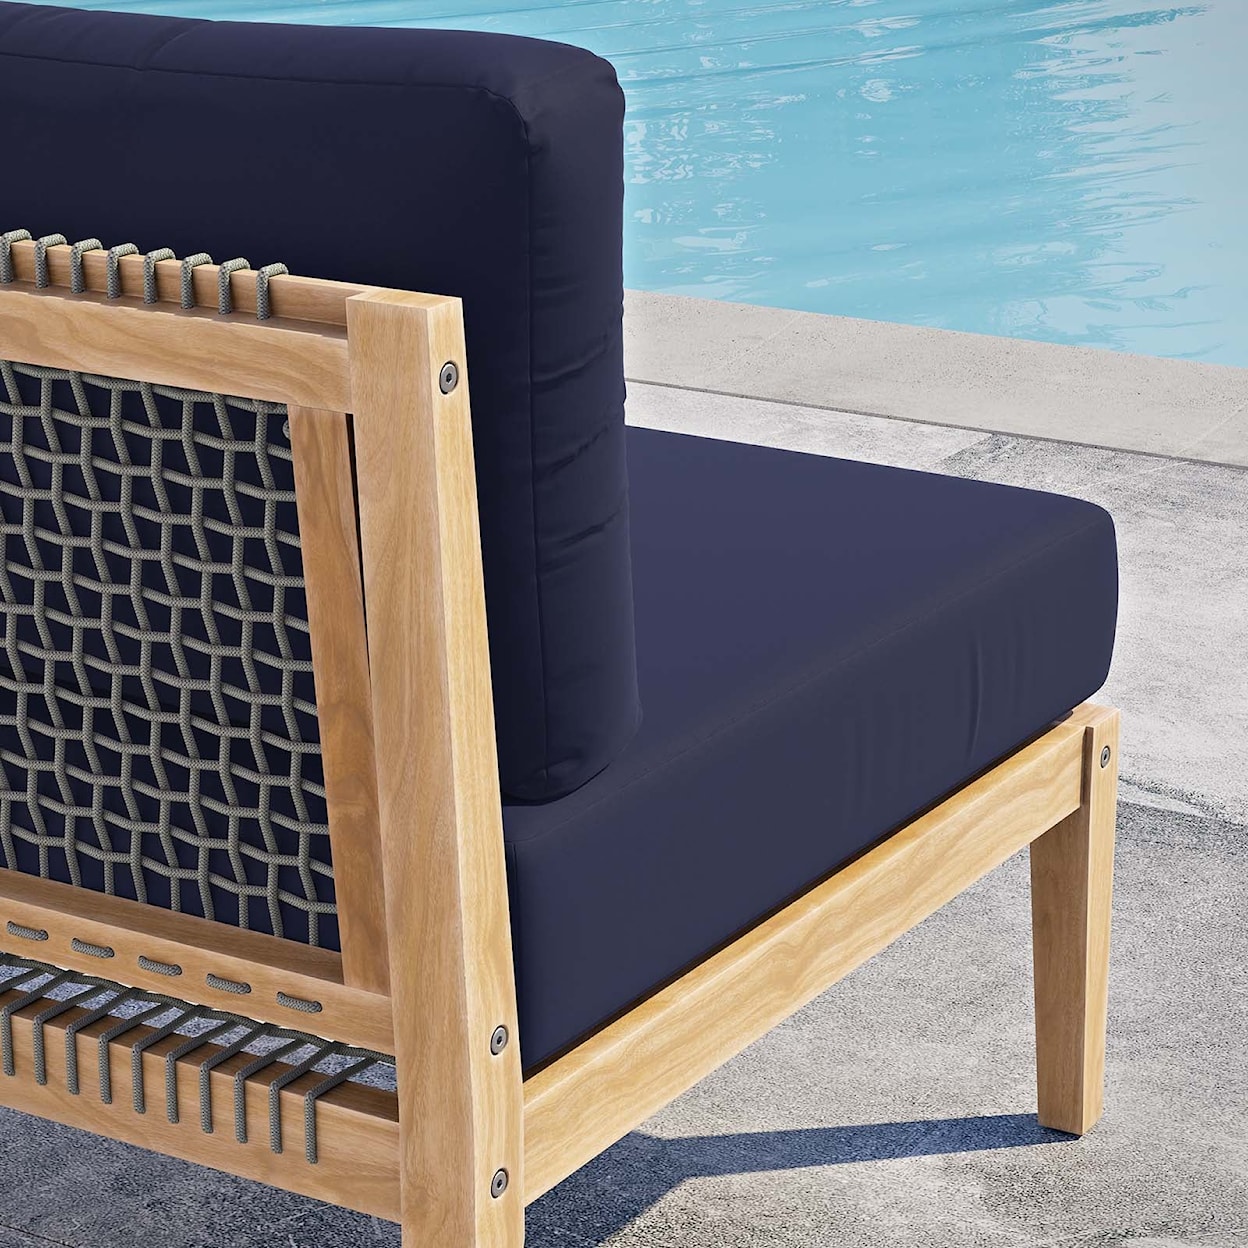 Modway Clearwater Outdoor Patio Armless Chair